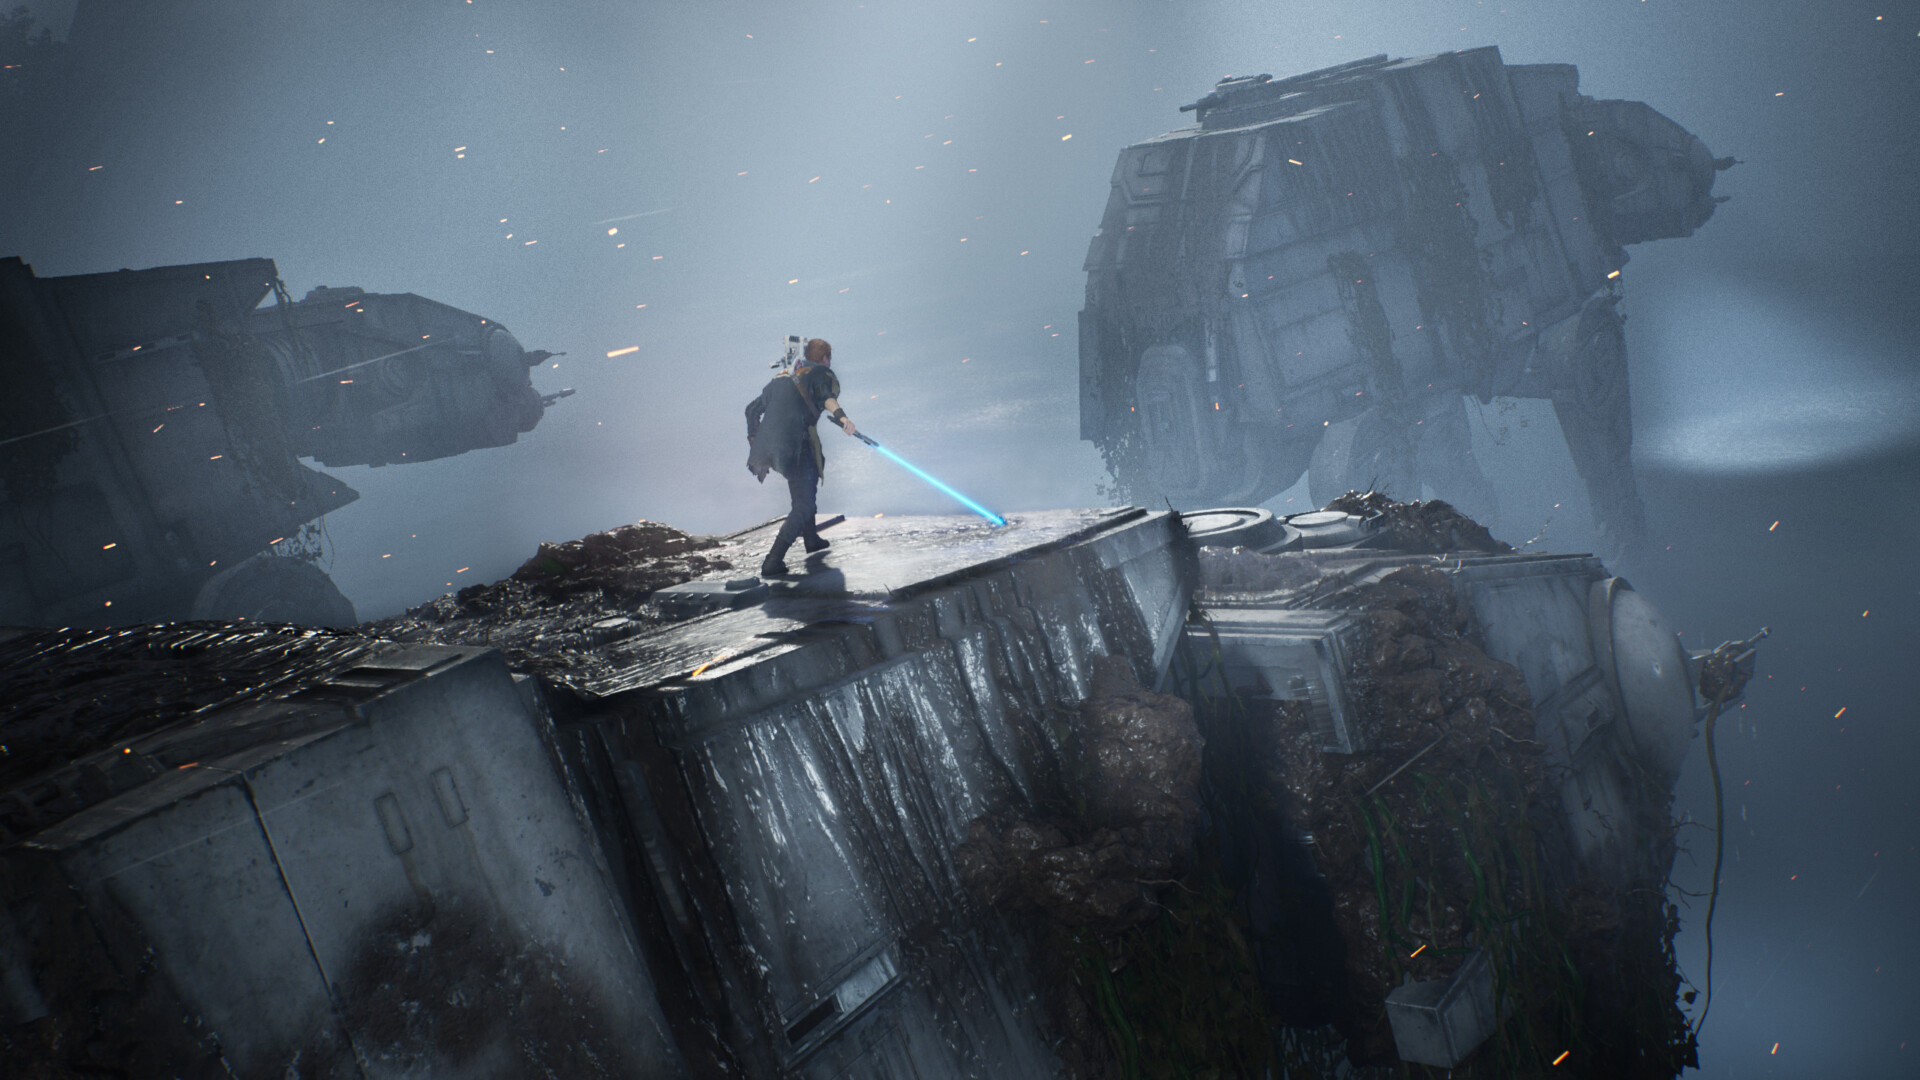 Prime Gaming January 2022 games include Star Wars: Jedi Fallen